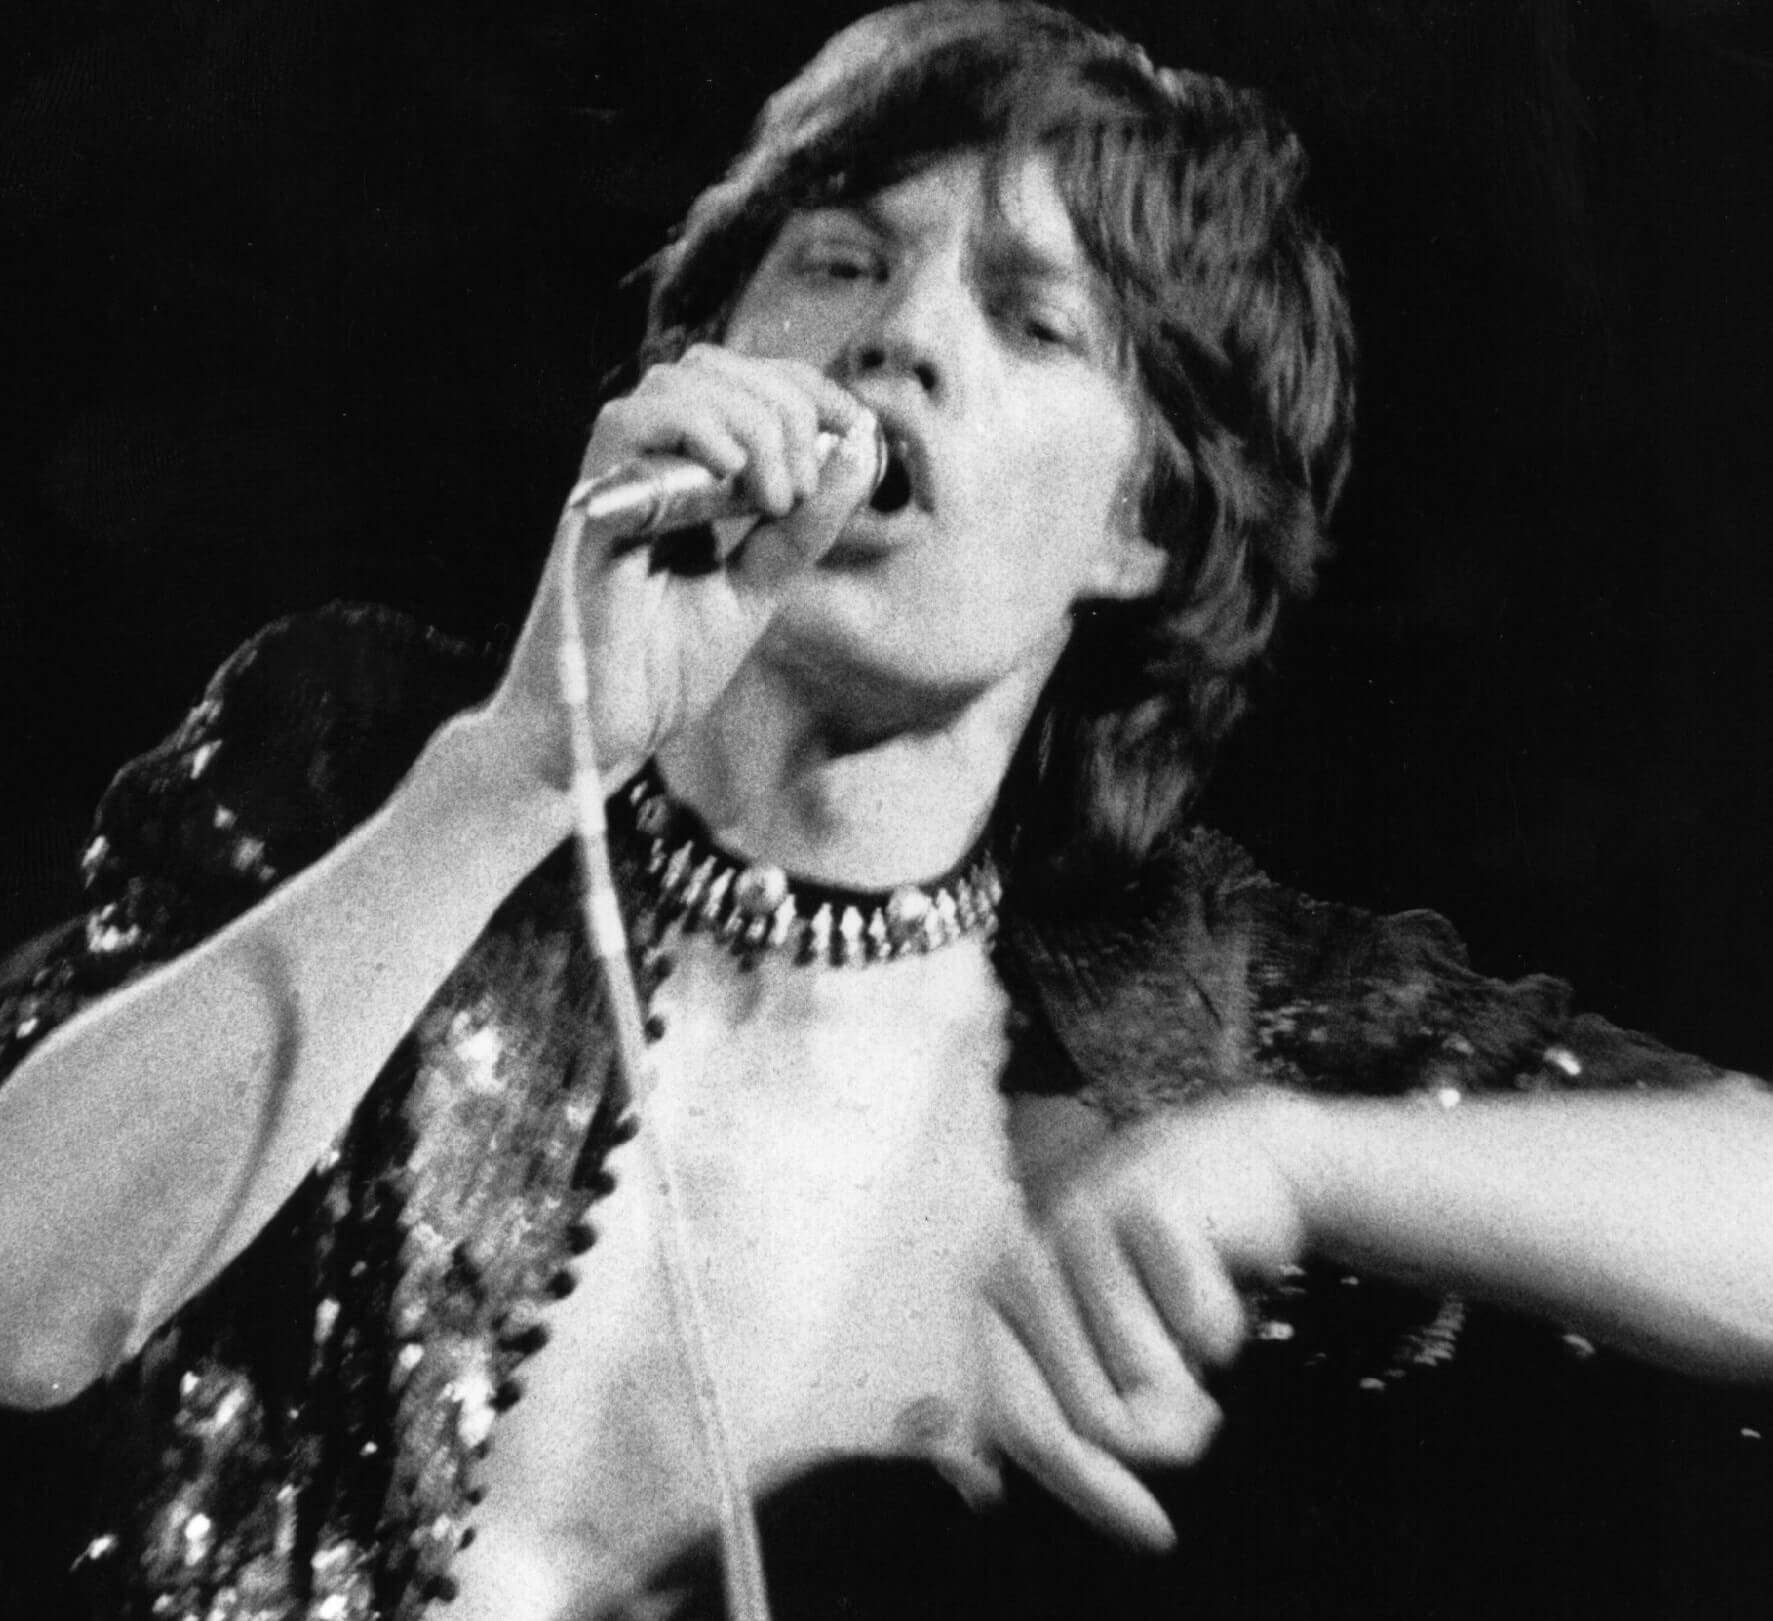 The Rolling Stones' Mick Jagger in black-and-white